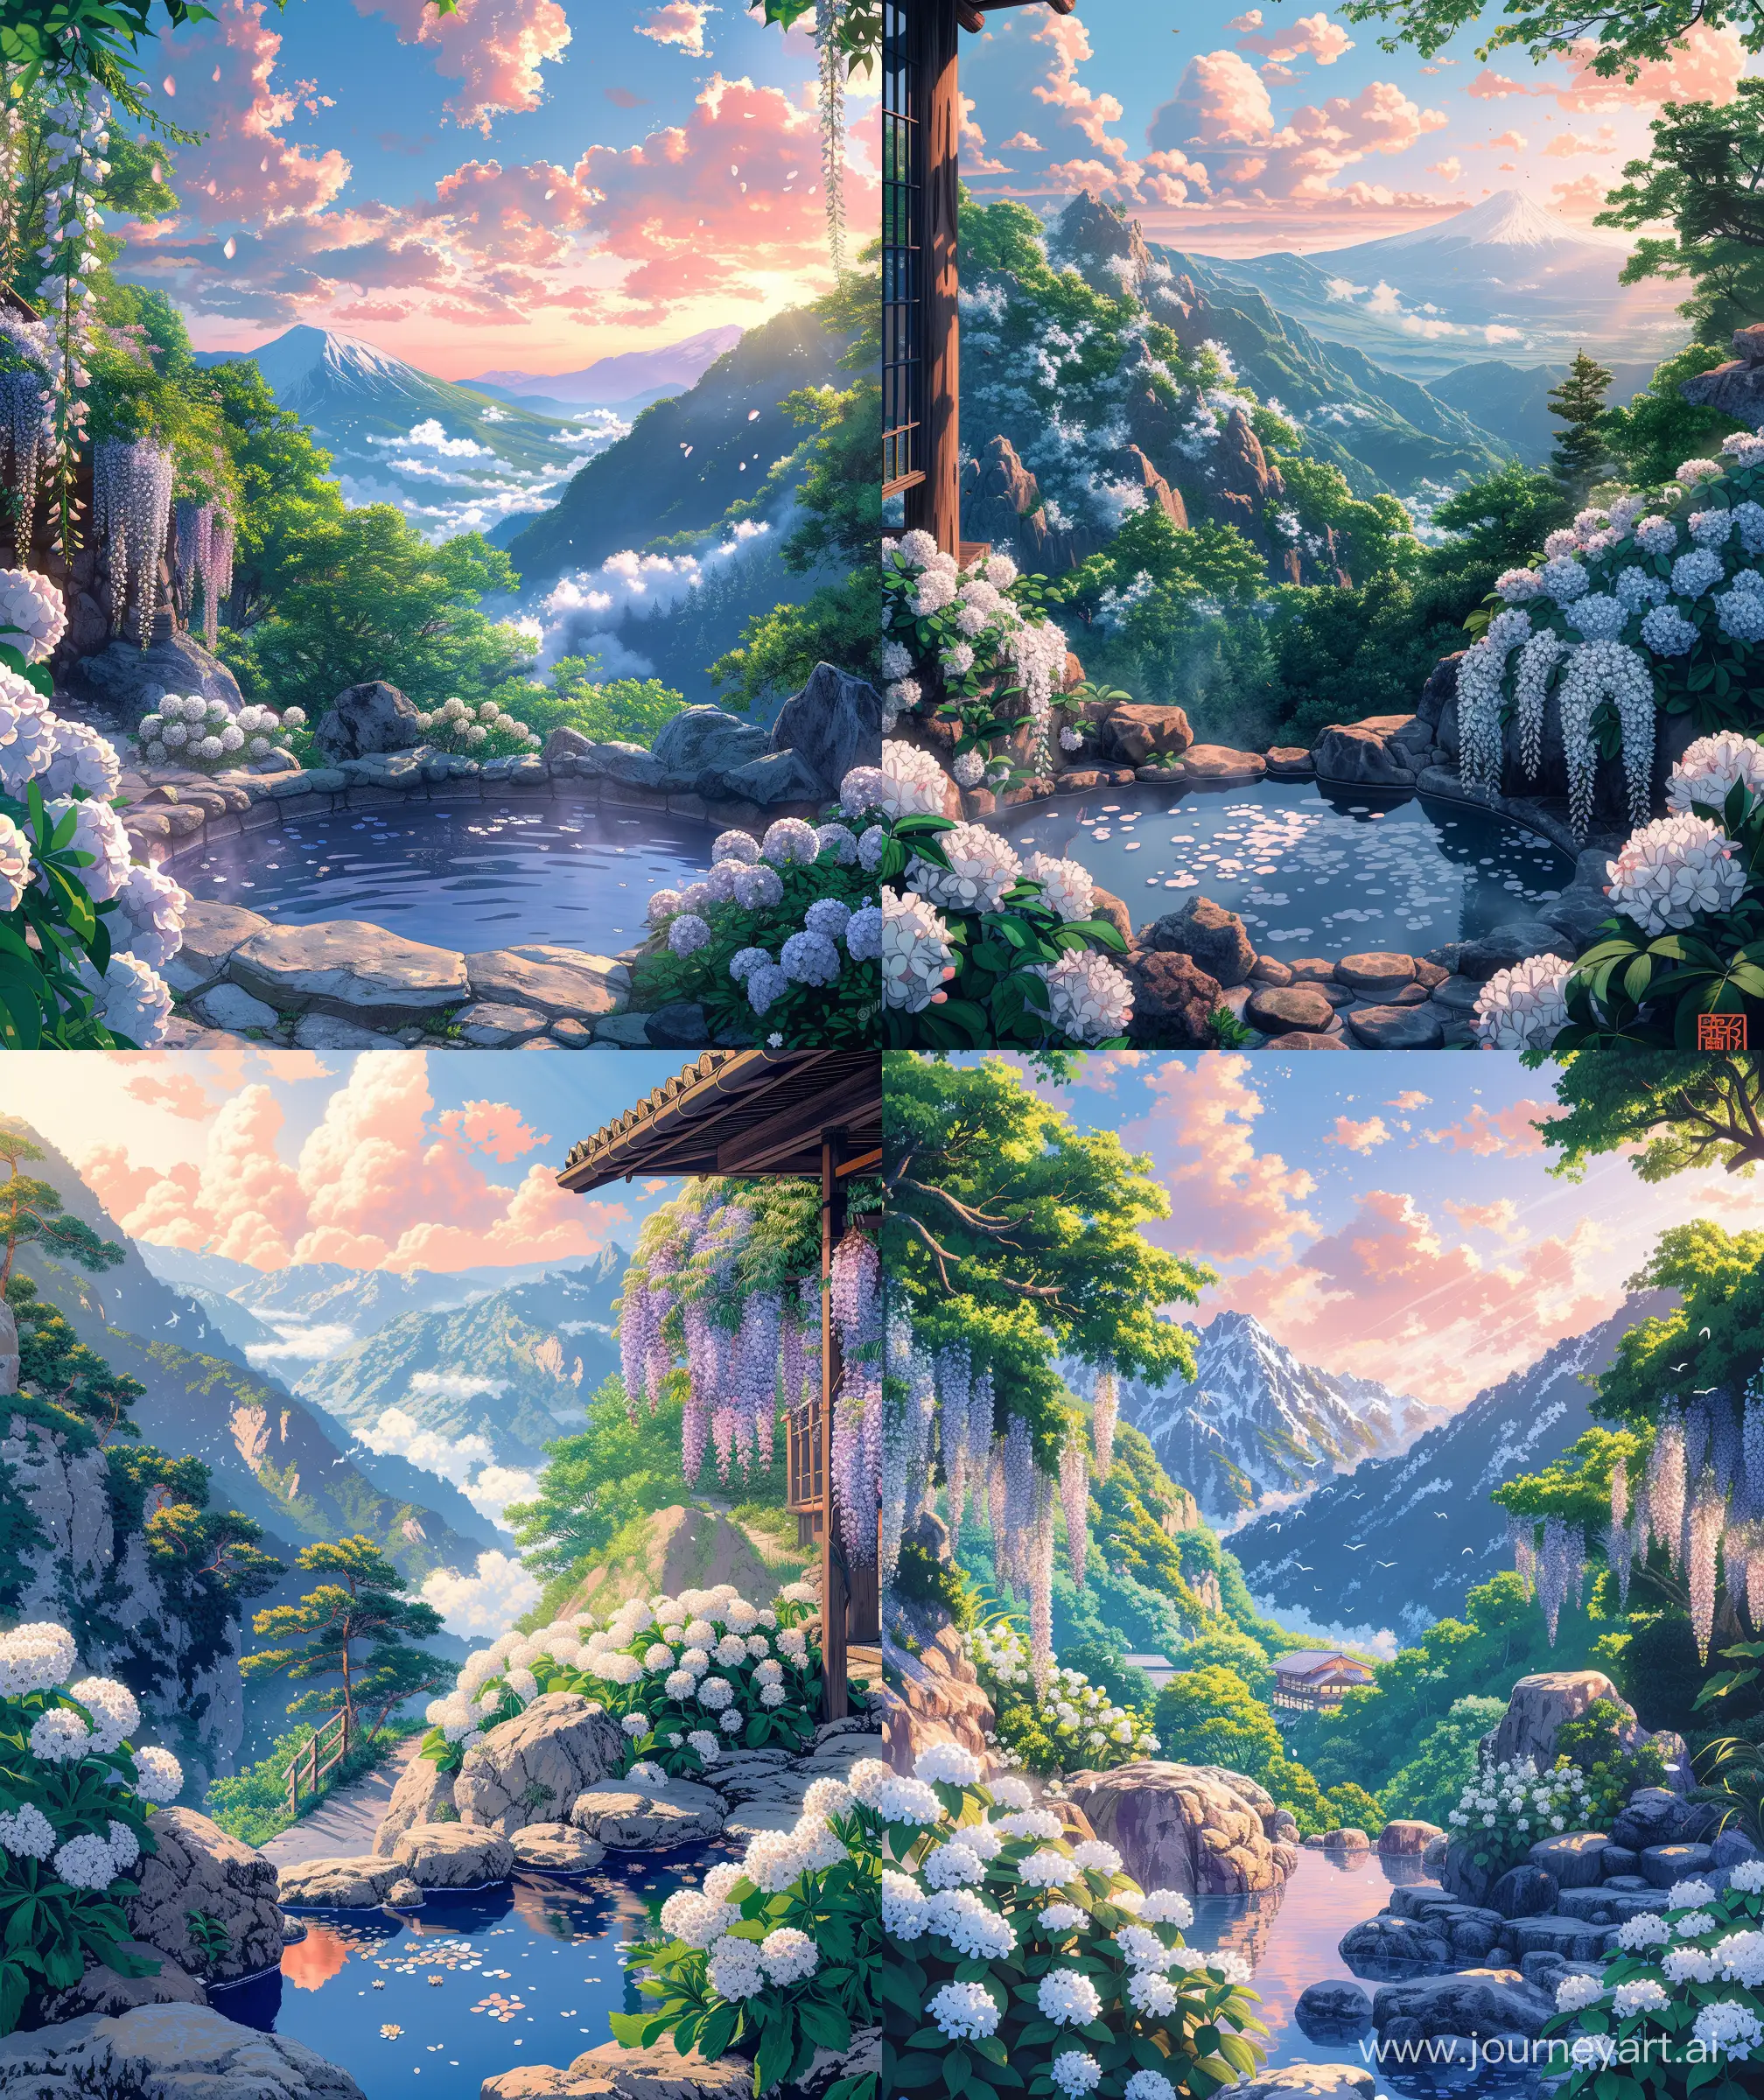 Beautiful anime scenary, Ghibli style, nature hot spring resort, beautiful mountain view, "wisteria" decorating "resort", many "white flowers" around beside rock, ,light vibrant pink and blue color sky, sunlight through clouds,illustration, Anime style, ultra HD, high quality, sharp details, no hyperrealistic --ar 27:32 --s 400